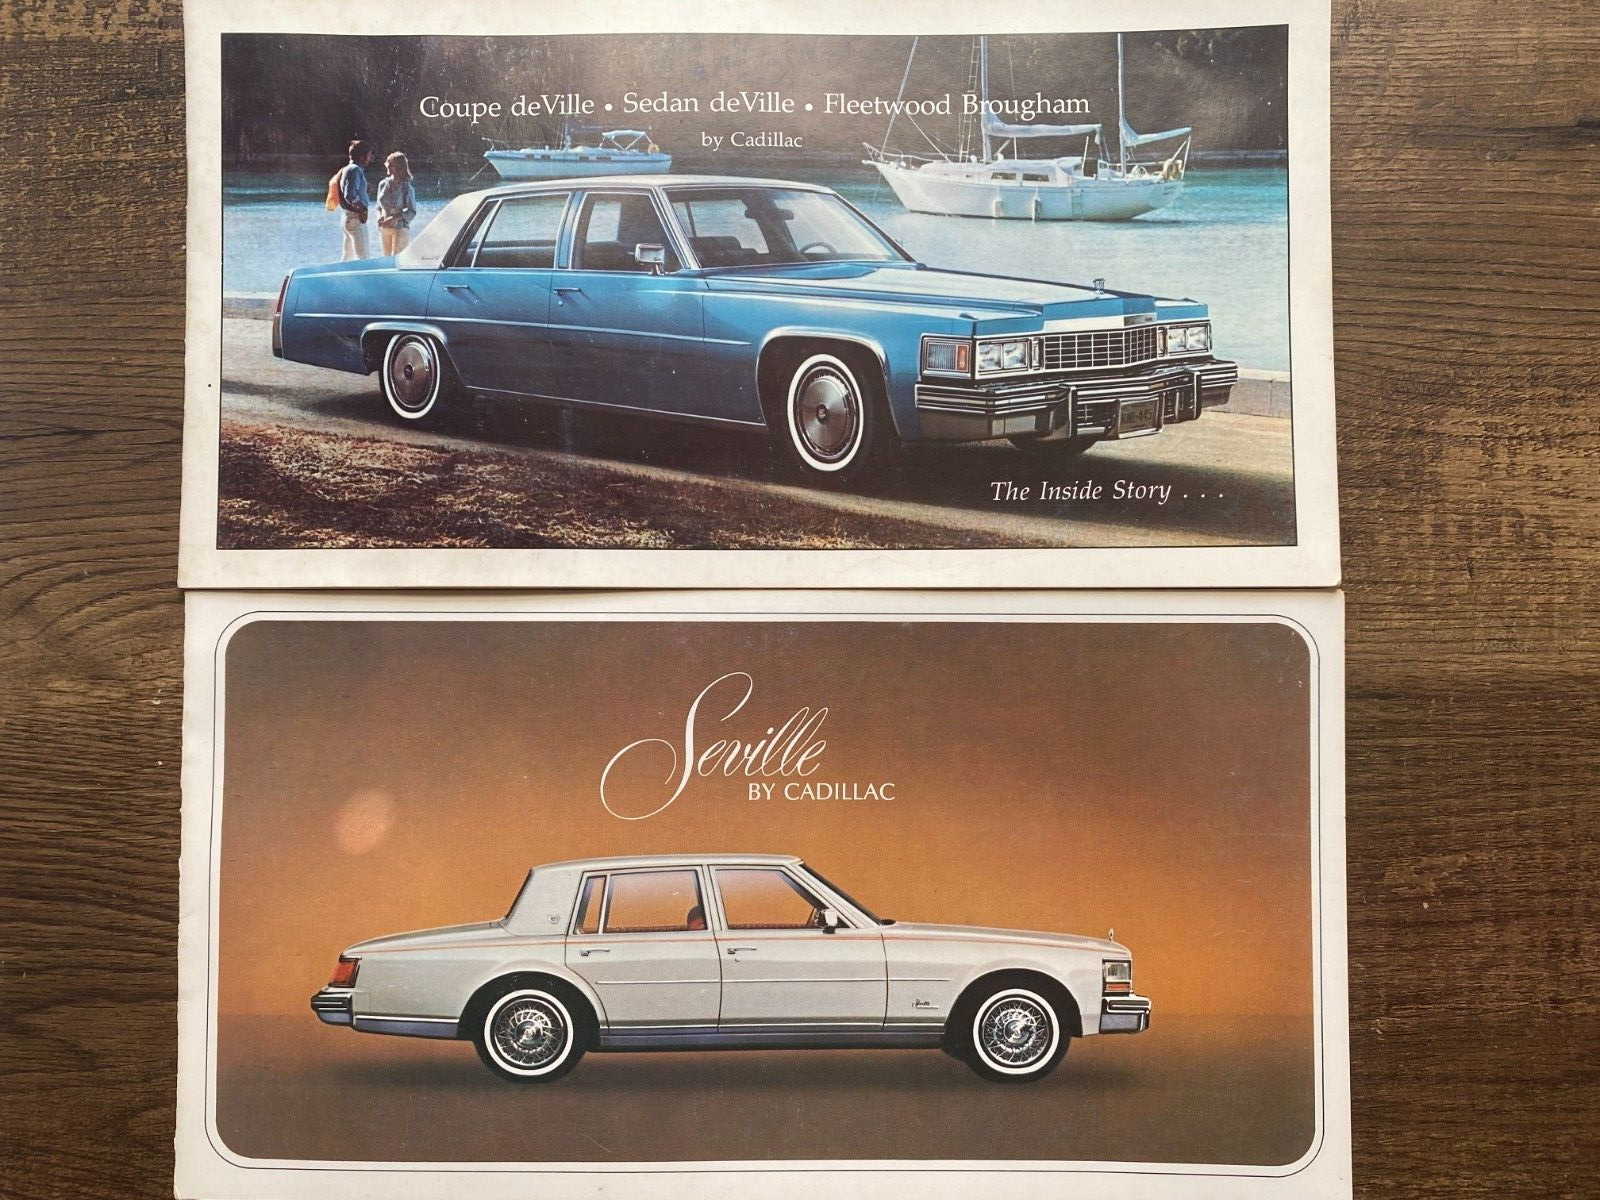 Seville by Cadillac & The Inside Story - Catalog Dealer Showroom Brochure 1970's